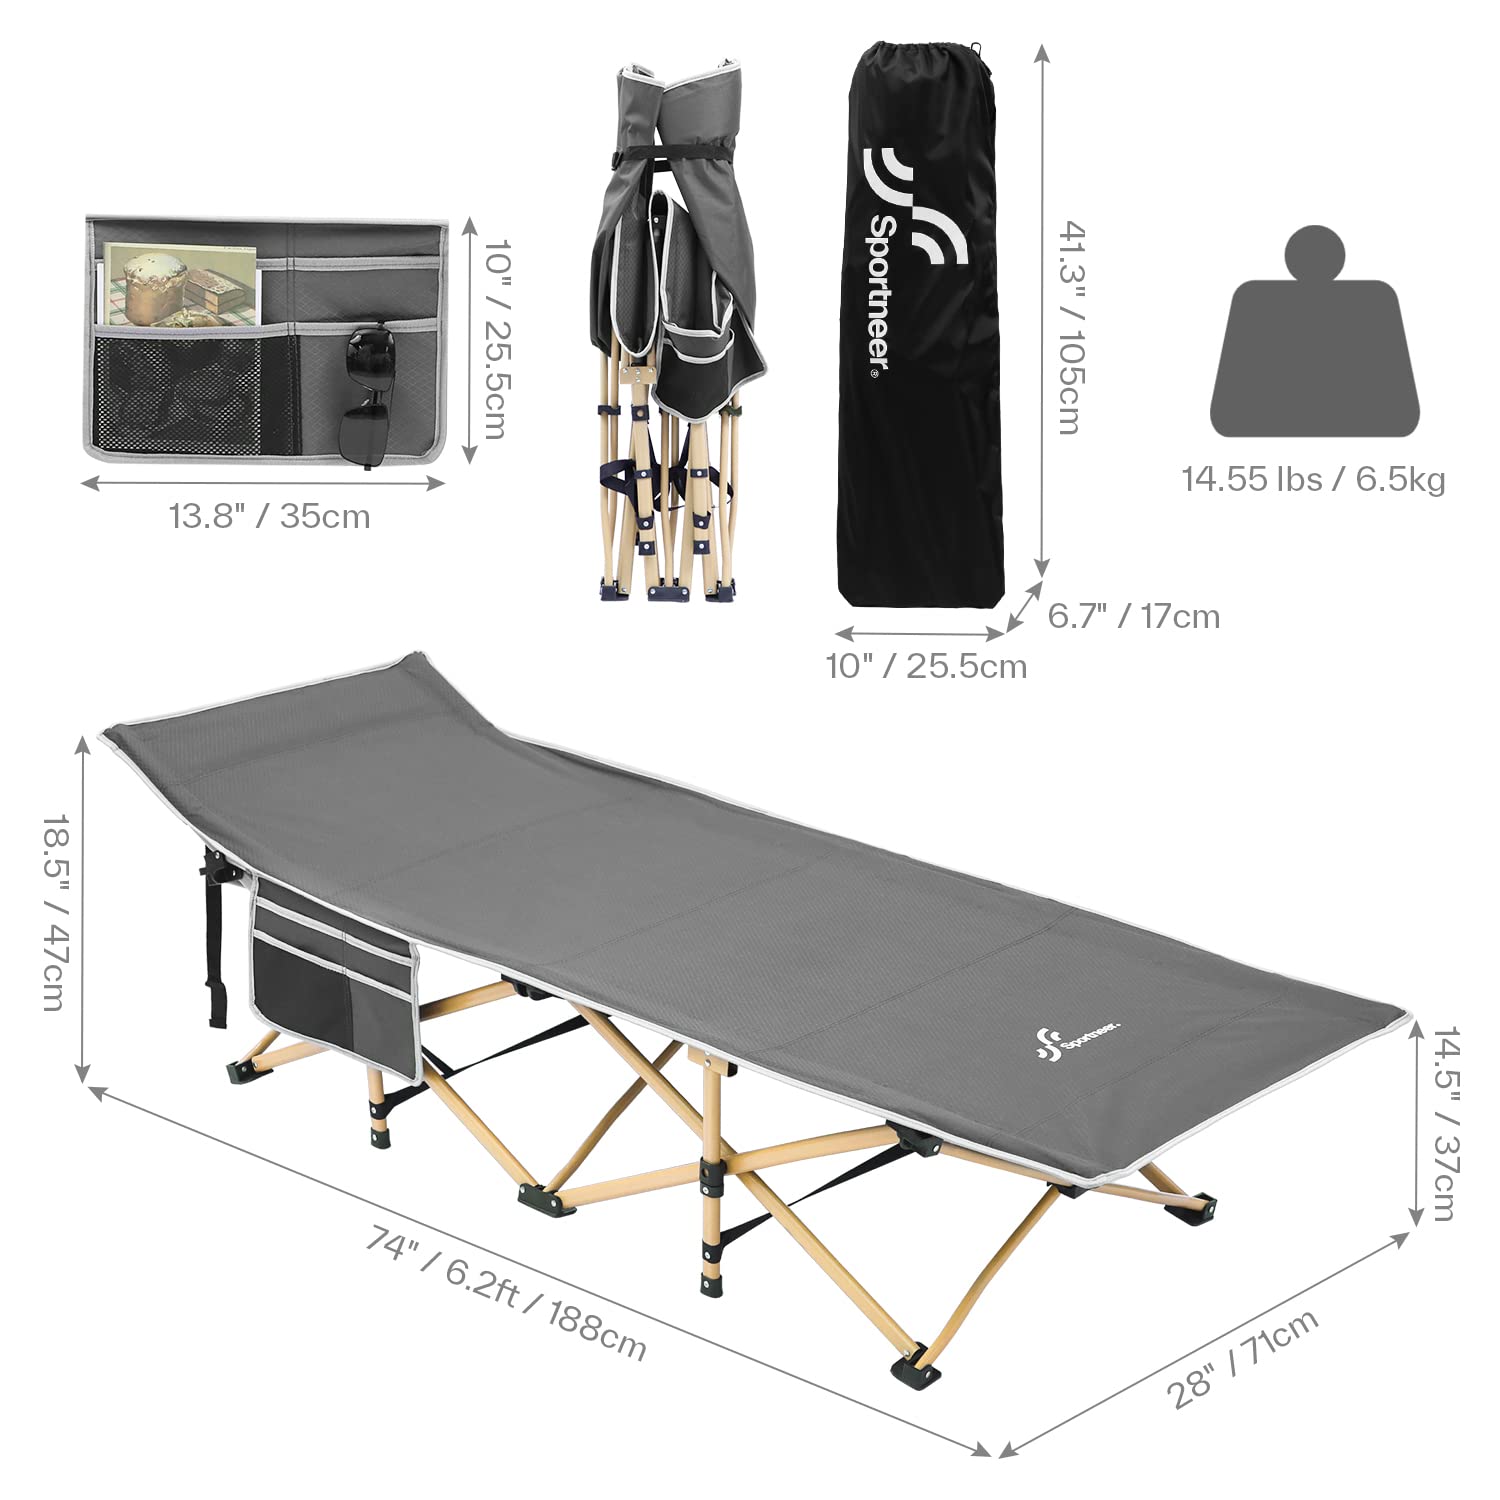 Sportneer Camping Cot, Cot Sleeping Cot 2 Side Pockets Camping Cots for Adults Portable Folding Kids Cots for Sleeping Extra Wide with Carry Bag Camping Beach BBQ Hiking Office